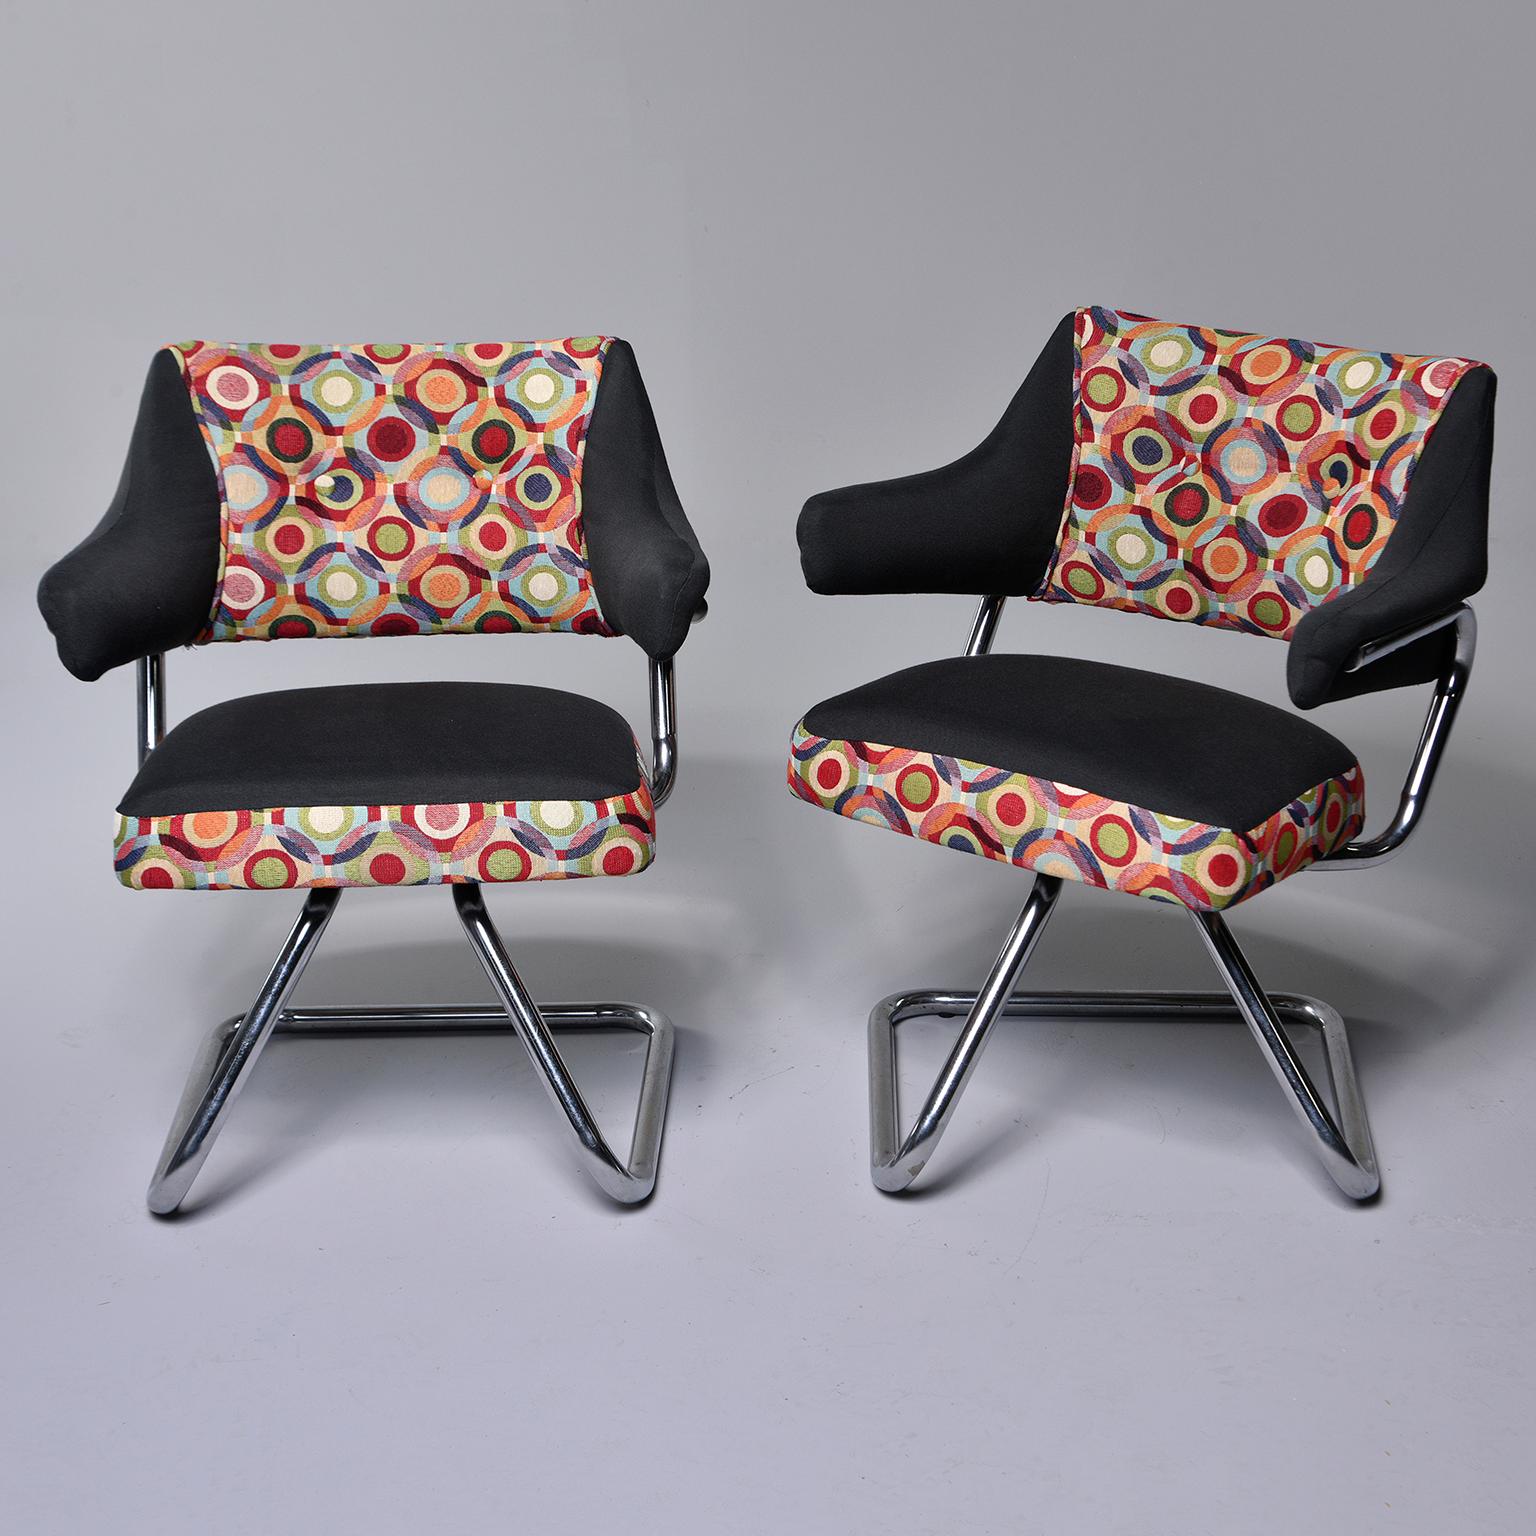 Pair circa 1960s Italian arm chairs feature a cantilever chrome base with swivel seats and new upholstery with colorful, Missoni-style fabric. Sold and priced as a pair. 

Arm Height:  24.5”  Seat Height:  18.25”
Seat Depth:  17.75”  Seat Width:  18”